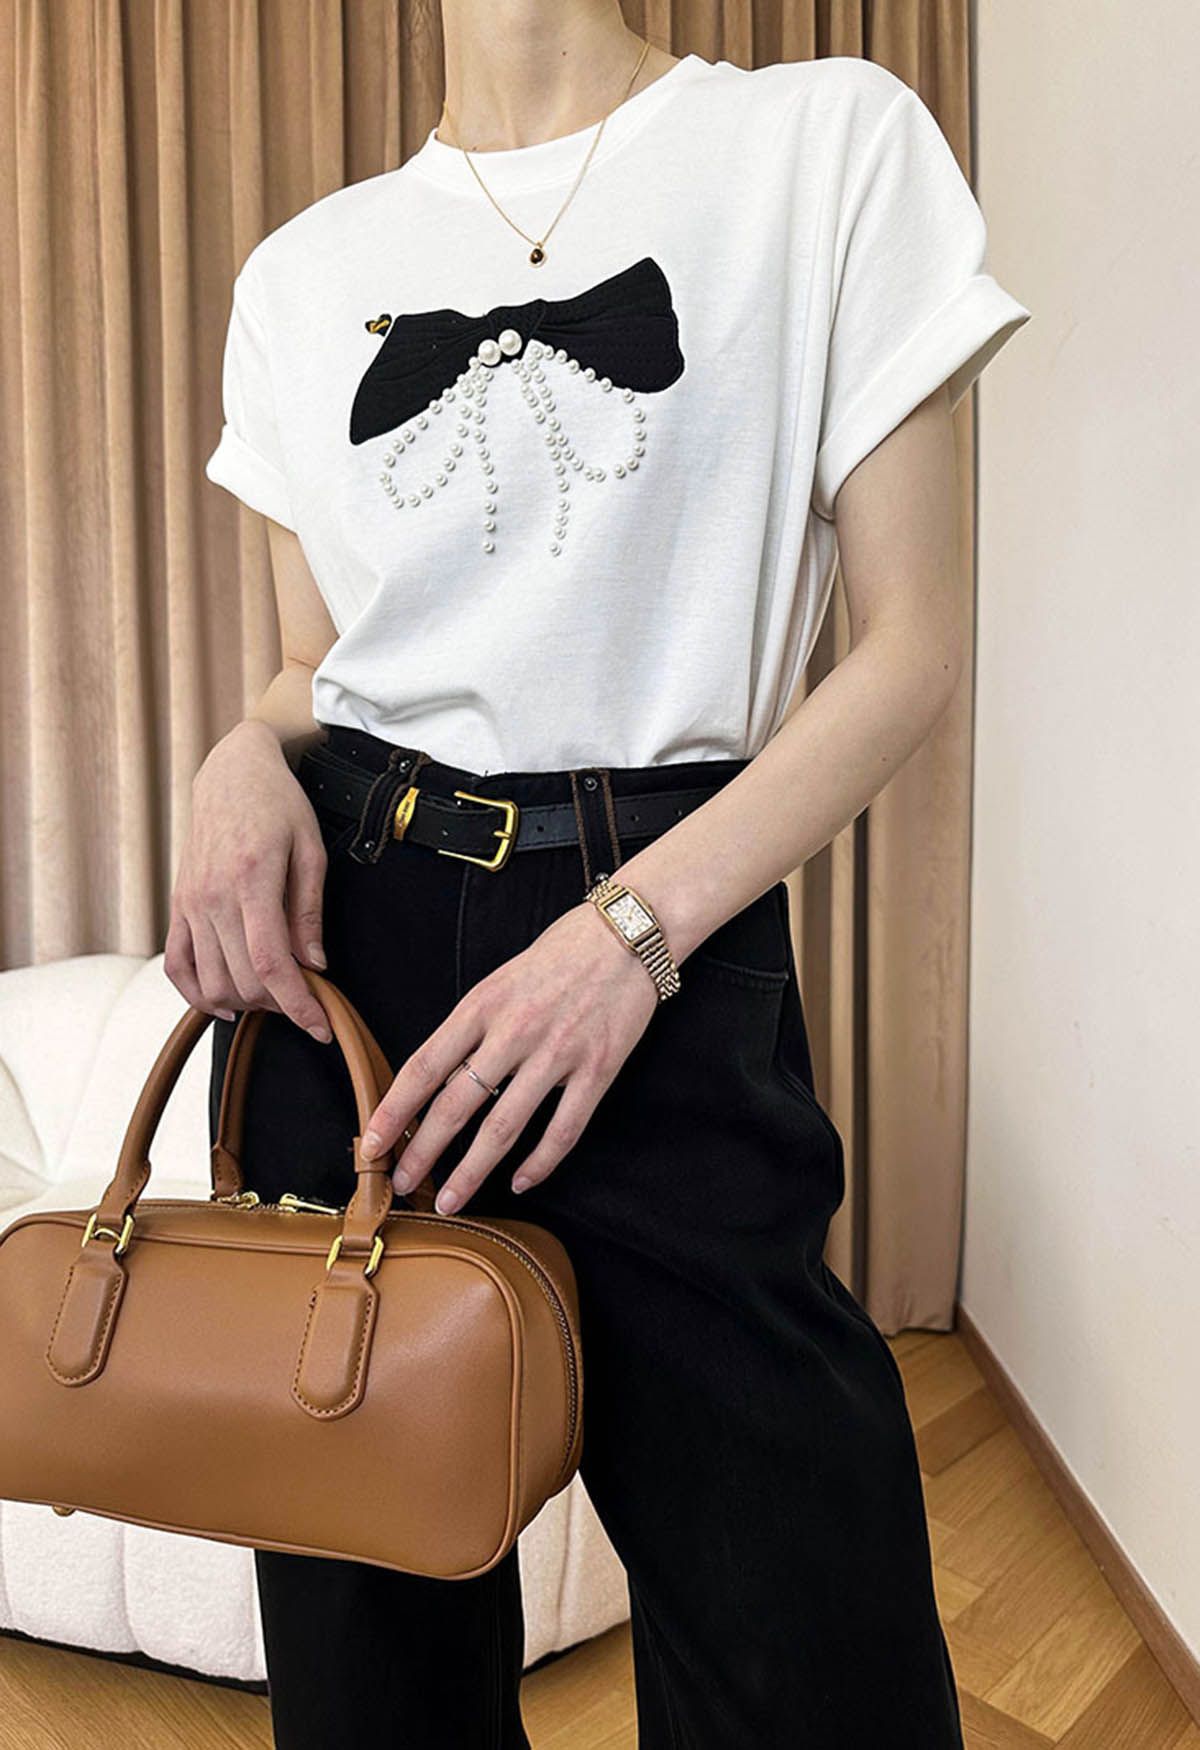 Bowknot Pattern Pearl Embellished T-Shirt in White